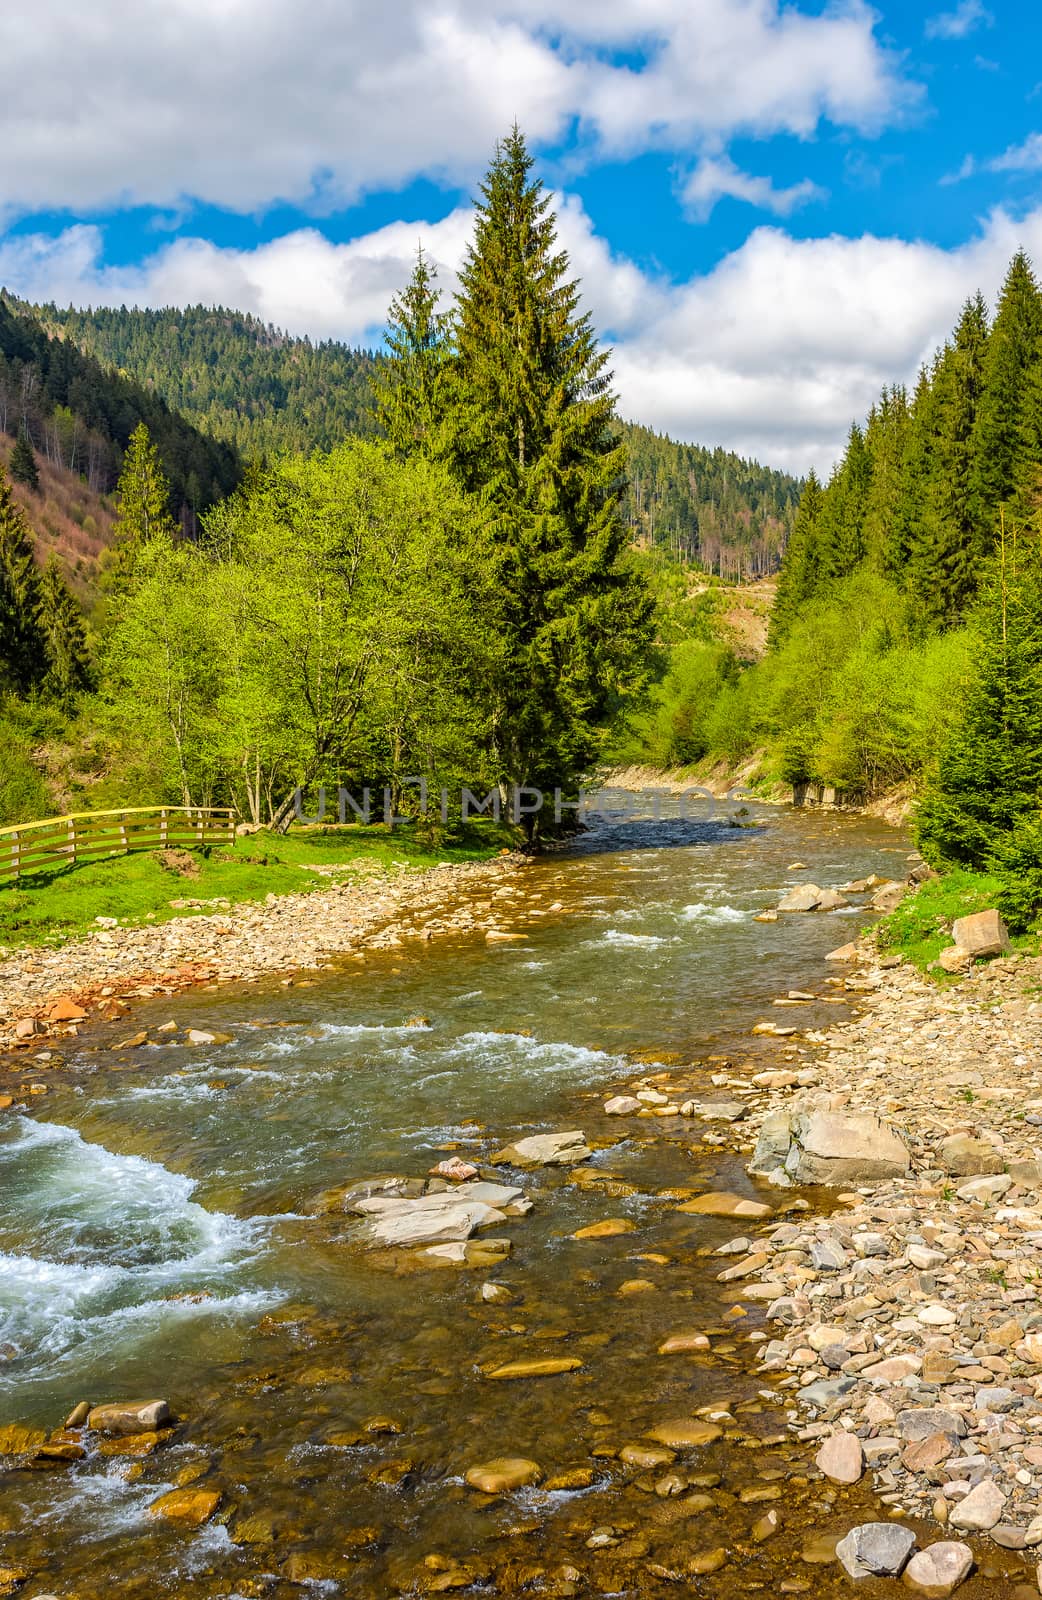 Rapid stream in green forest by Pellinni